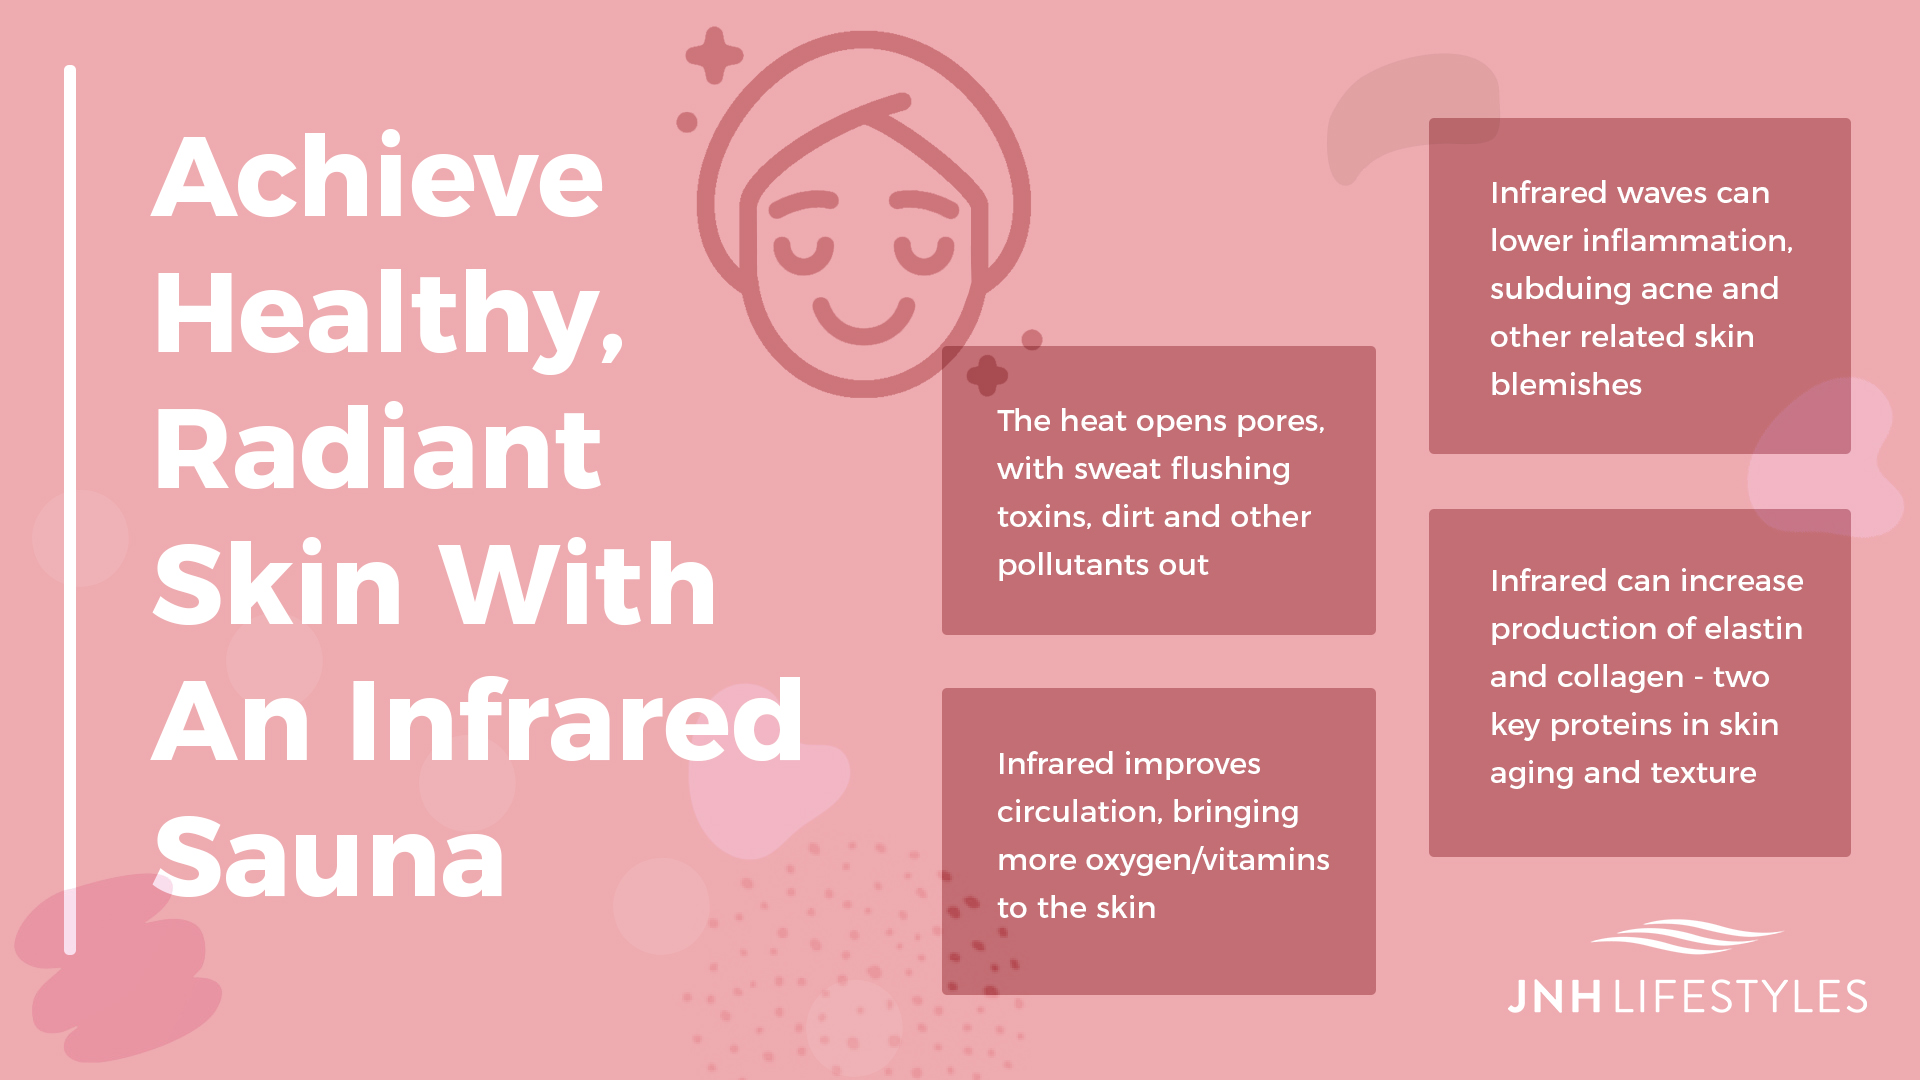 Achieve Healthy, Radiant Skin With An Infrared Sauna: -The heat opens pores, with sweat flushing toxins, dirt and other pollutants out -Infrared waves can lower inflammation, subduing acne and other related skin blemishes -Infrared improves circulation, bringing more oxygen/vitamins to the skin -Infrared can increase production of elastin and collagen - two key proteins in skin aging and texture